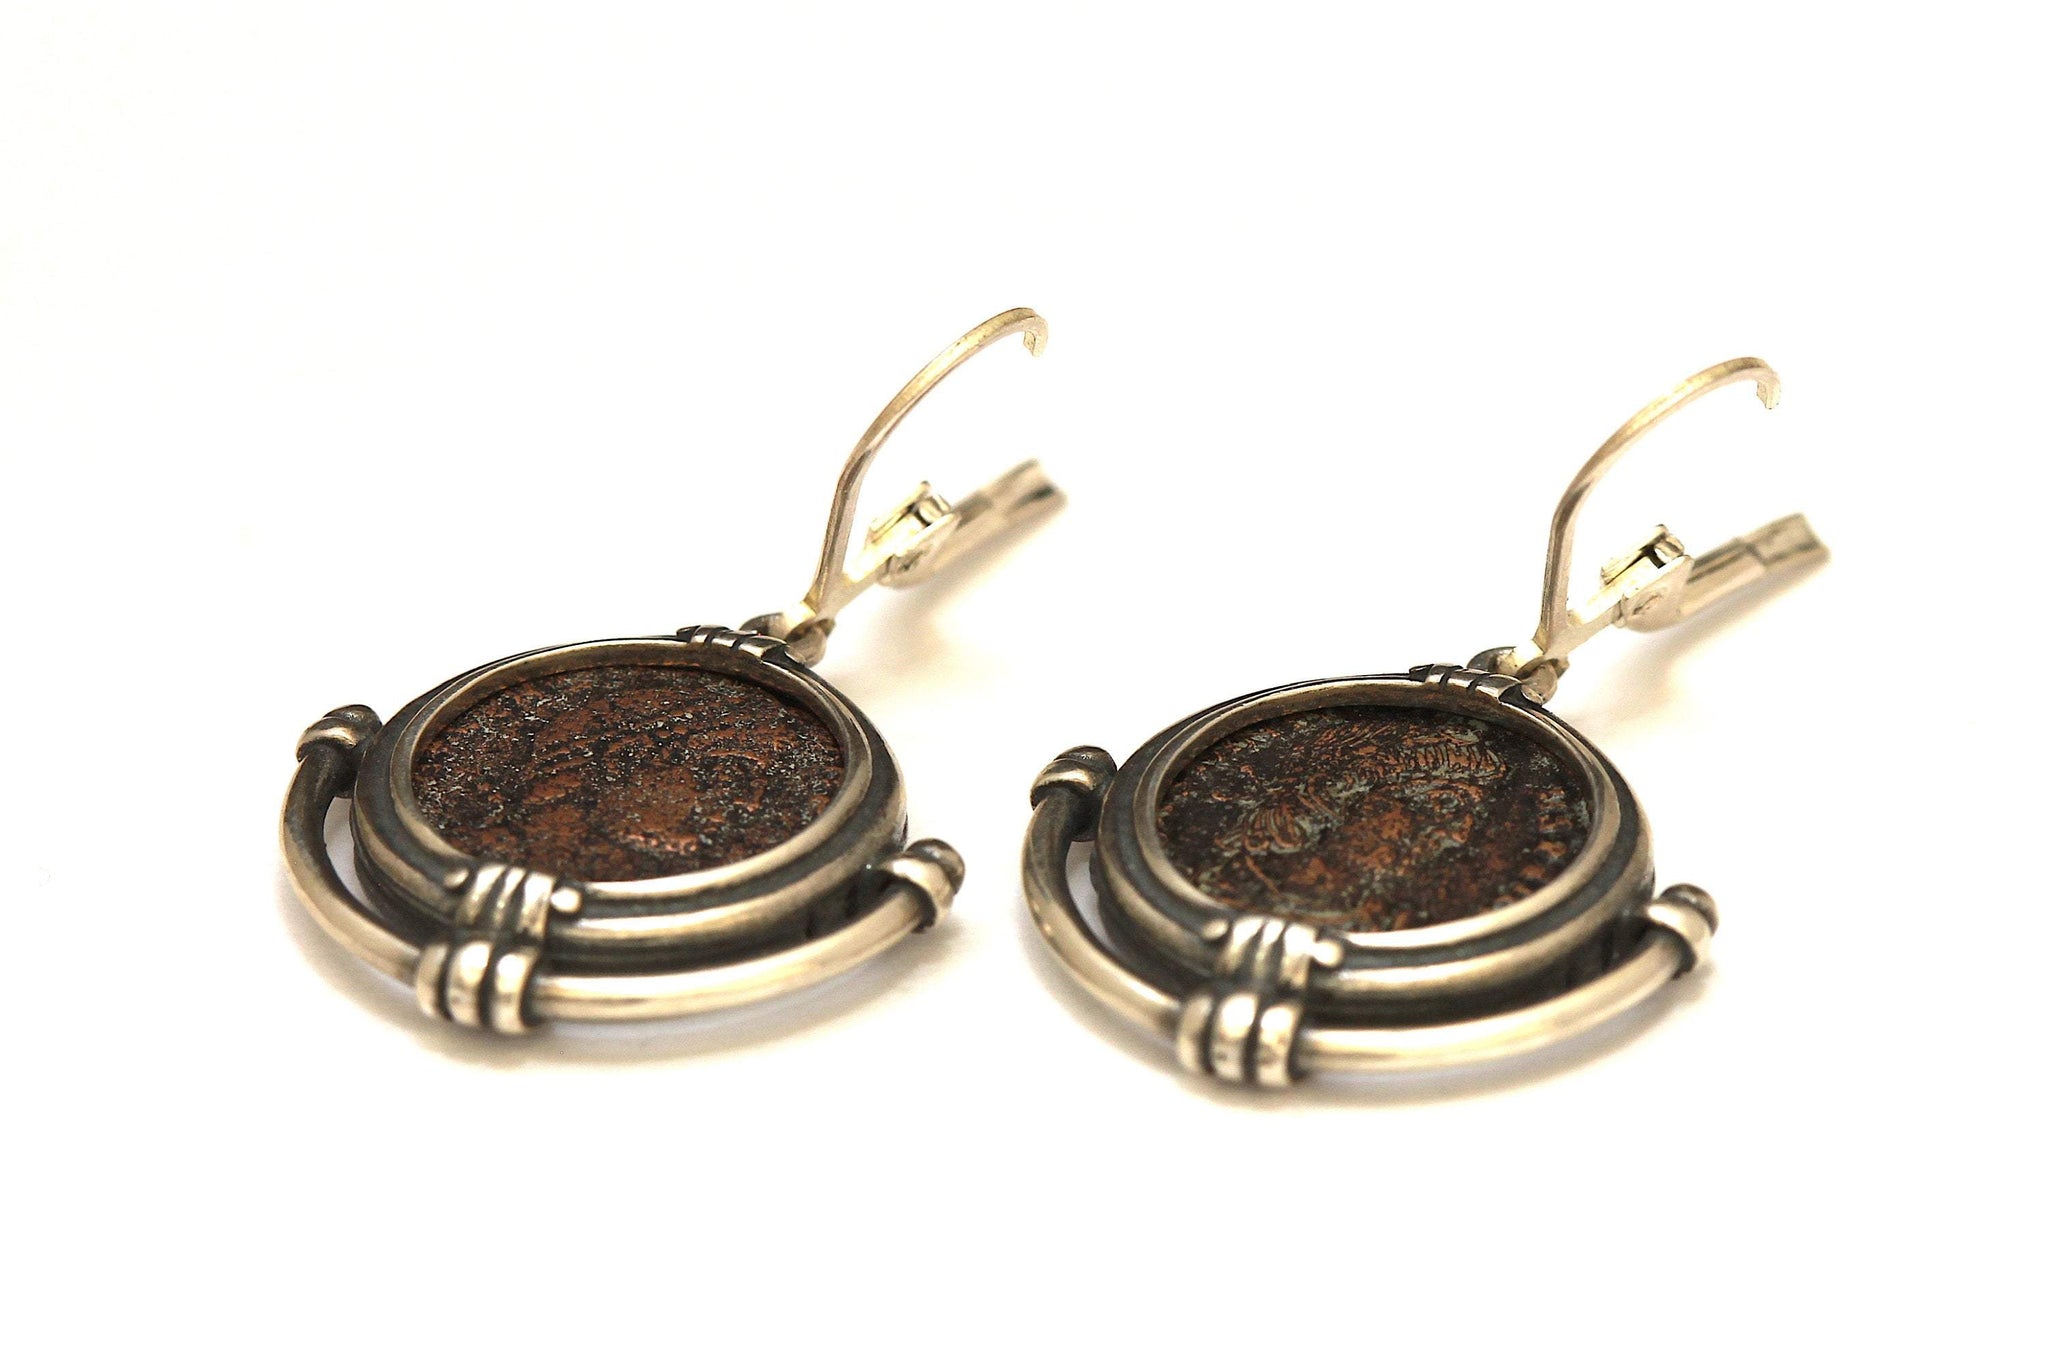 Roman Bronze Coins, Silver Earrings, Genuine Ancient Coins, with Certificate 6572 - Erez Ancient Coin Jewelry 